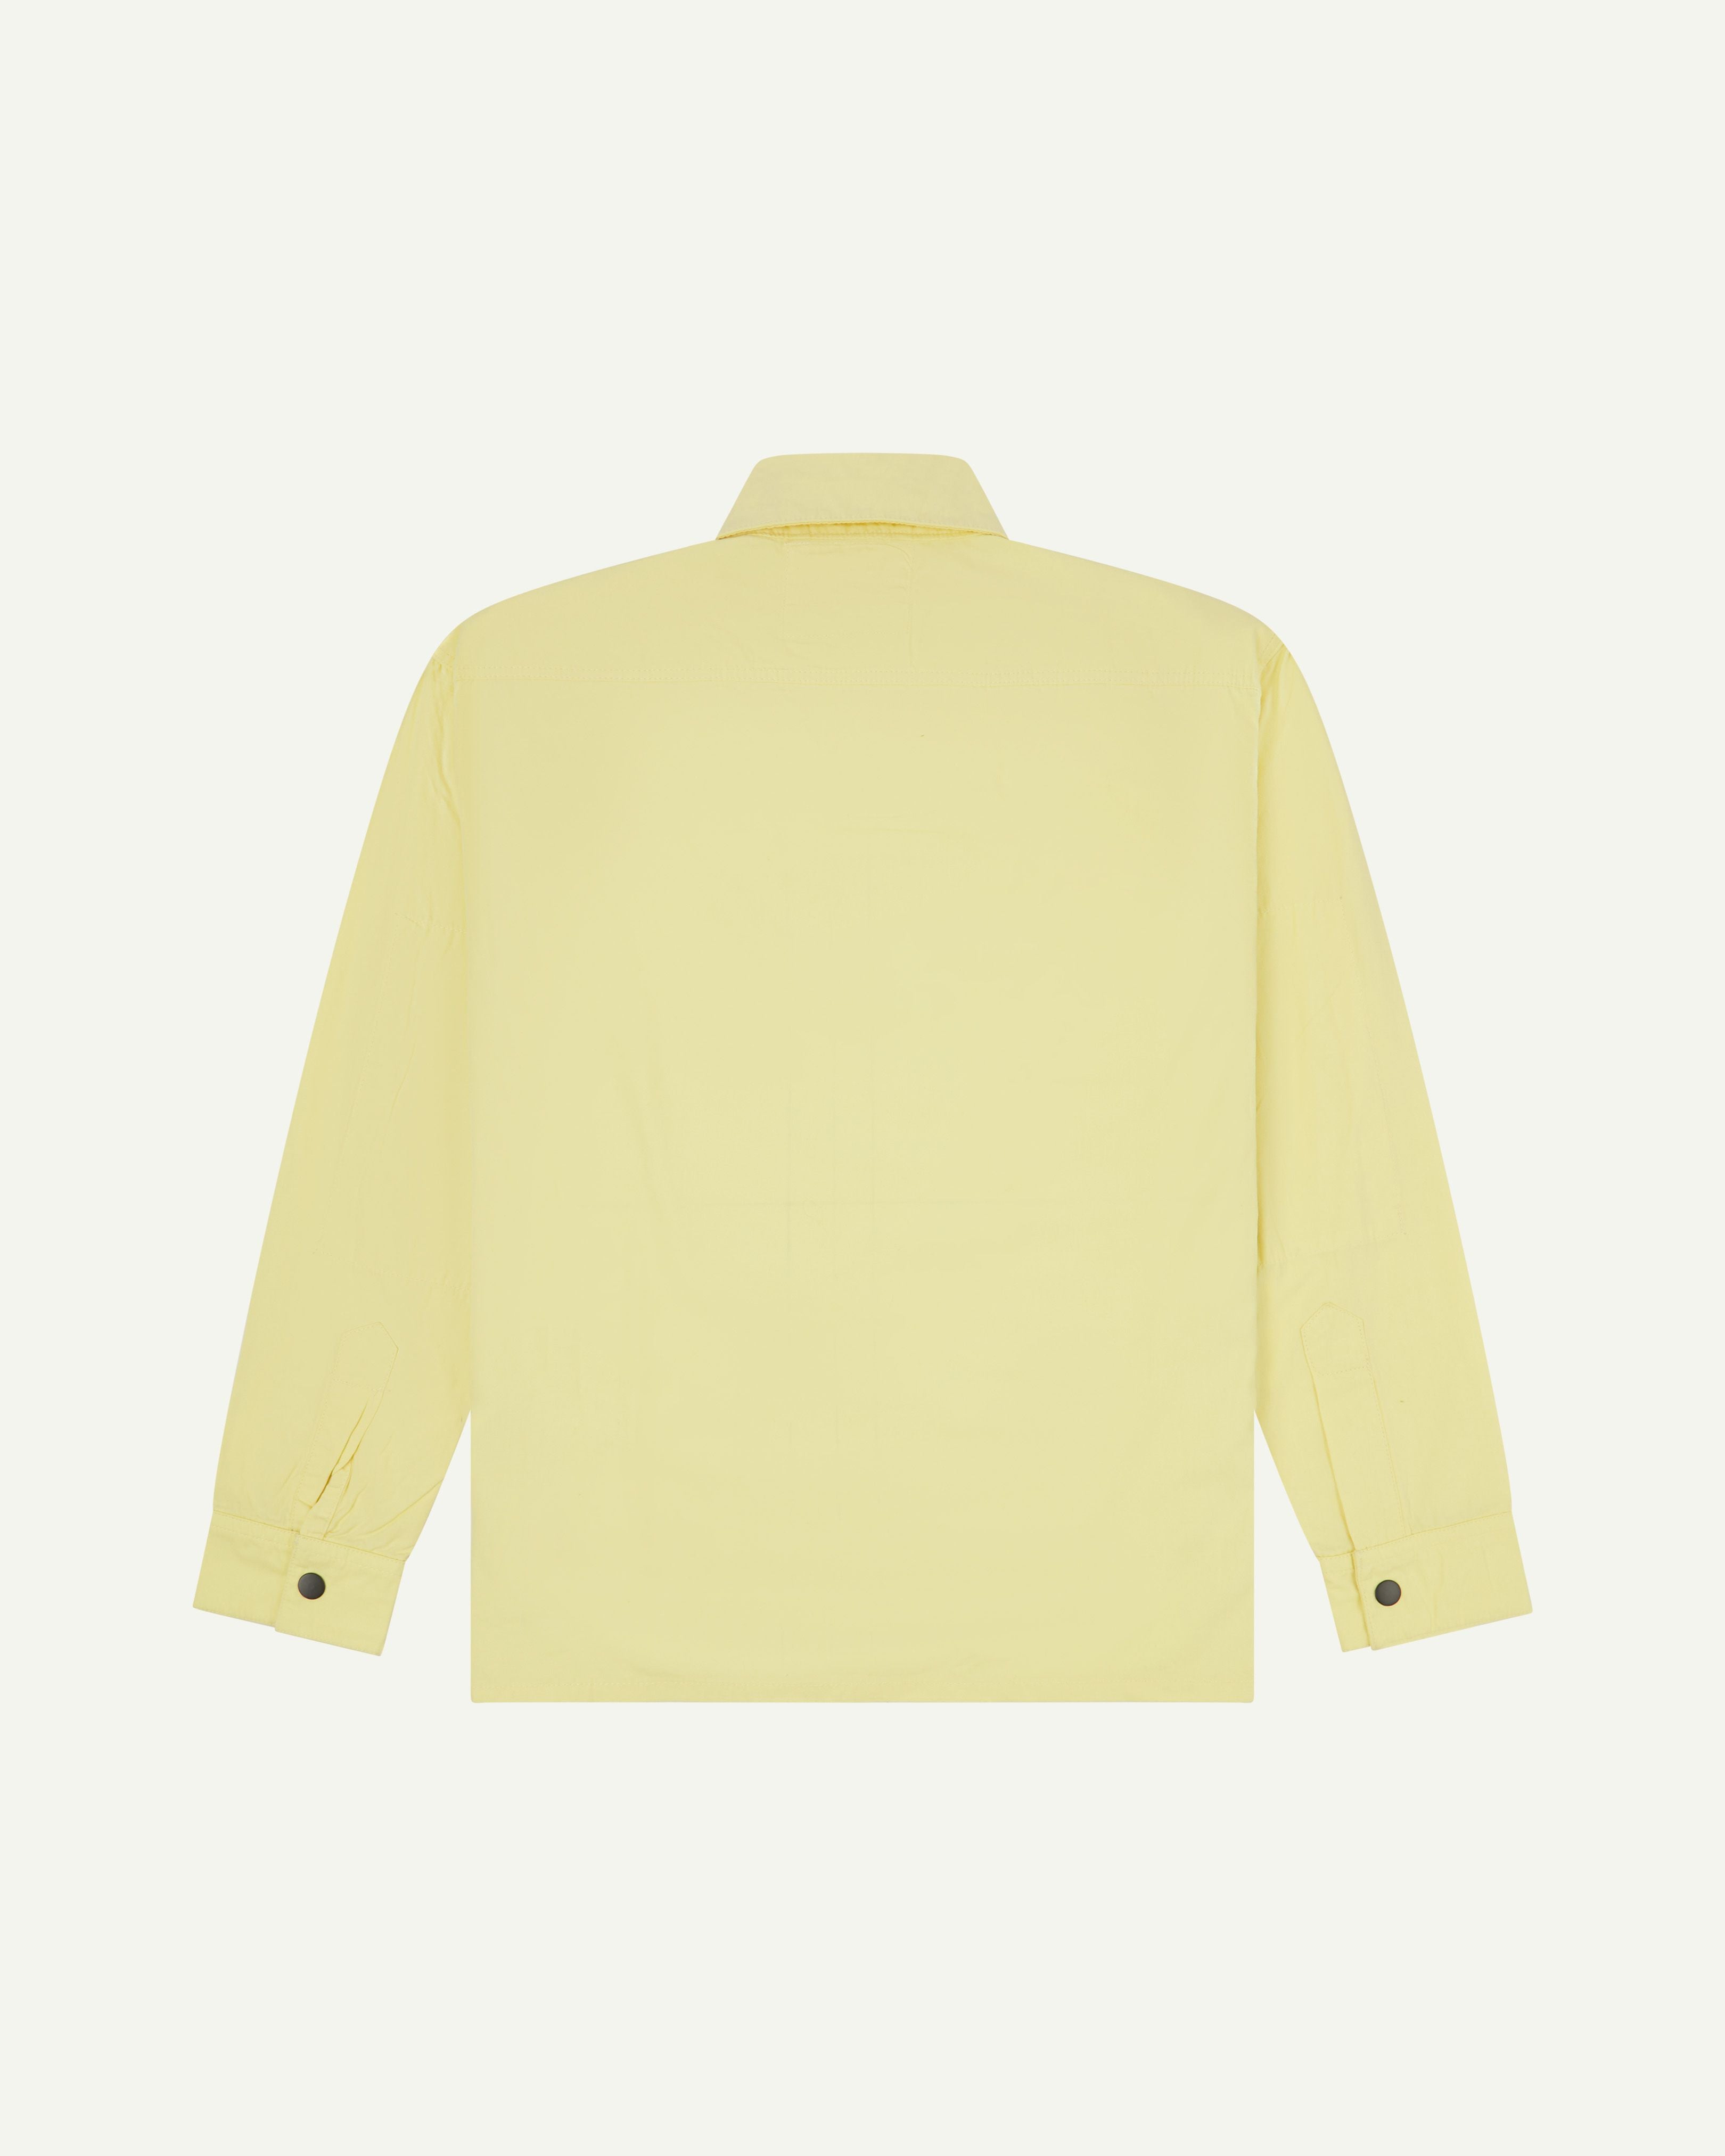 back-view of pale yellow buttoned lightweight long sleeve overshirt from Uskees. Showing black press studs on cuffs